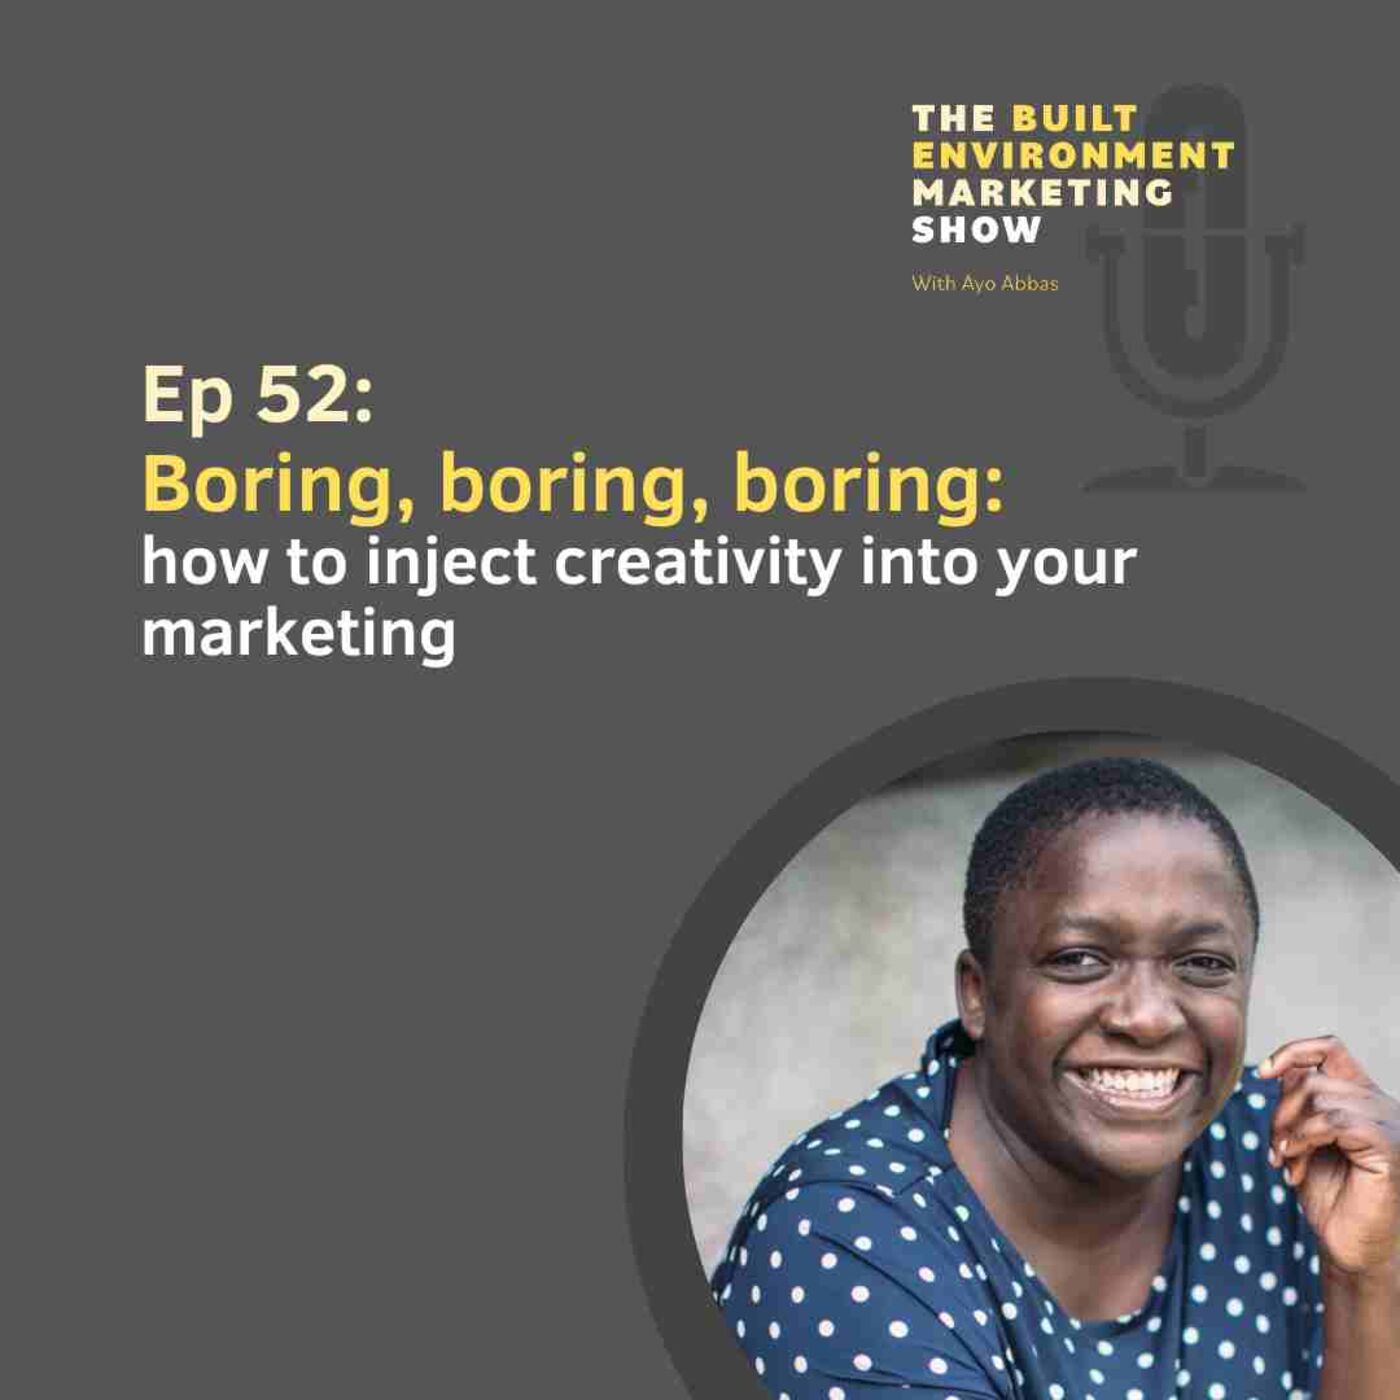 Ep 52: Boring, boring, boring: how to inject creativity into your marketing